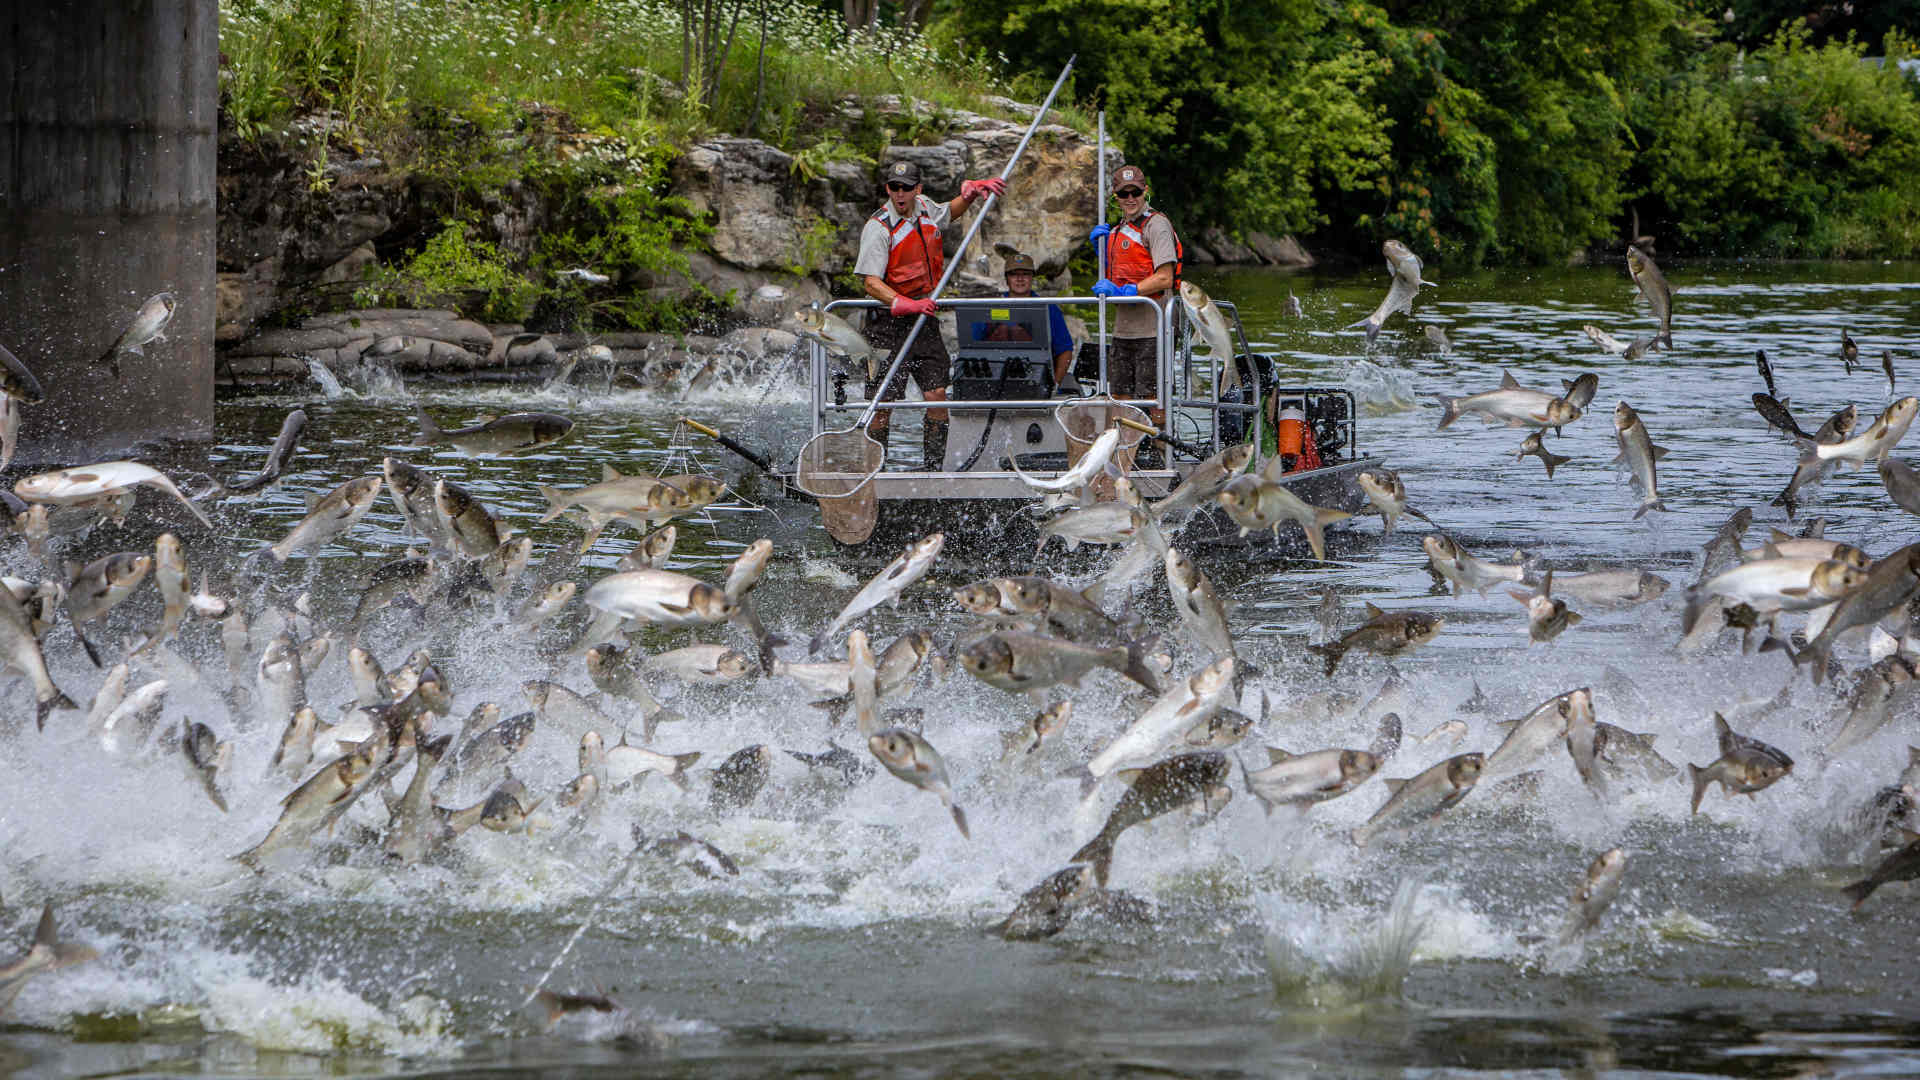 Invasive Asian carp were introduced to control algae and other aquatic problems. Multimillion-dollar projects to curb their spread include electrifying rivers, resulting in impressive acrobatics.